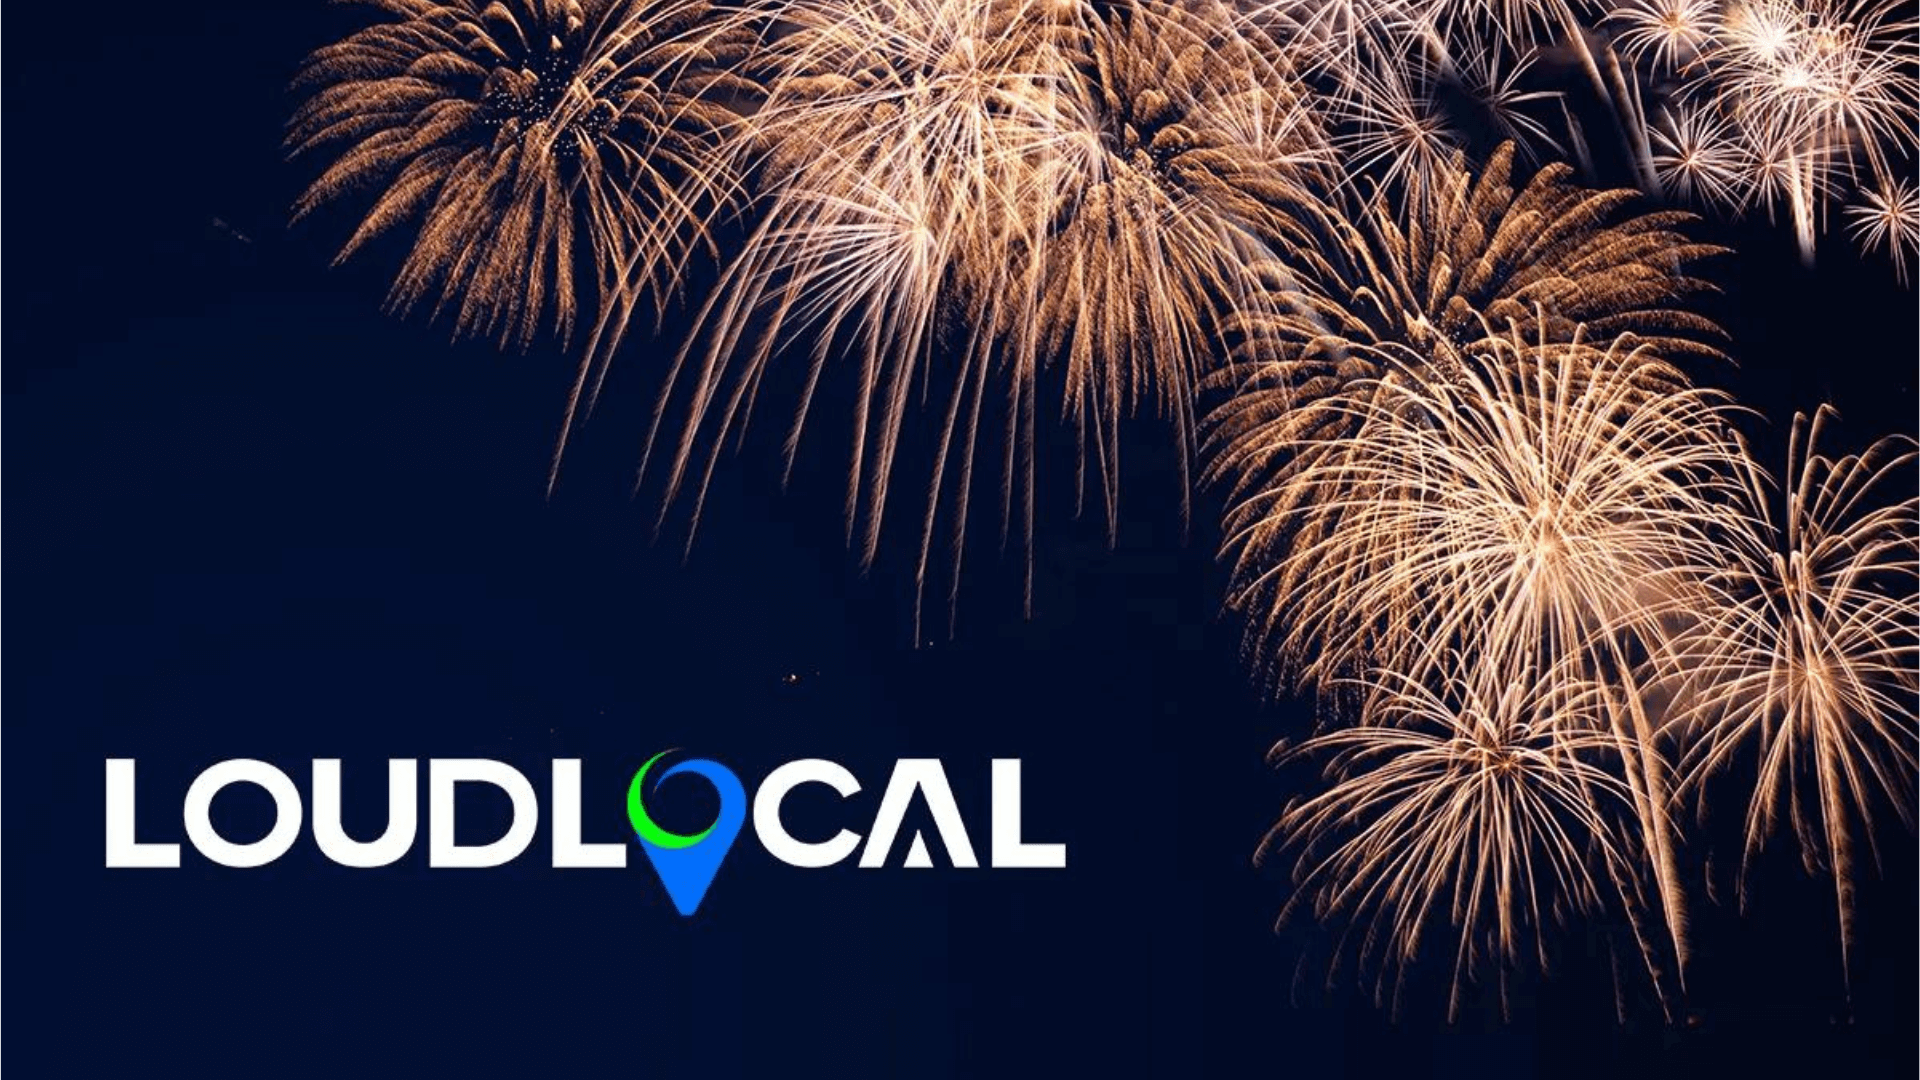 Images of fireworks, representing the launch of LoudLocal.  Fireworks are showing against a dark blue background and in foreground is the LoudLocal logo, which has white text and a map marker which is half light blue and vibrant green.